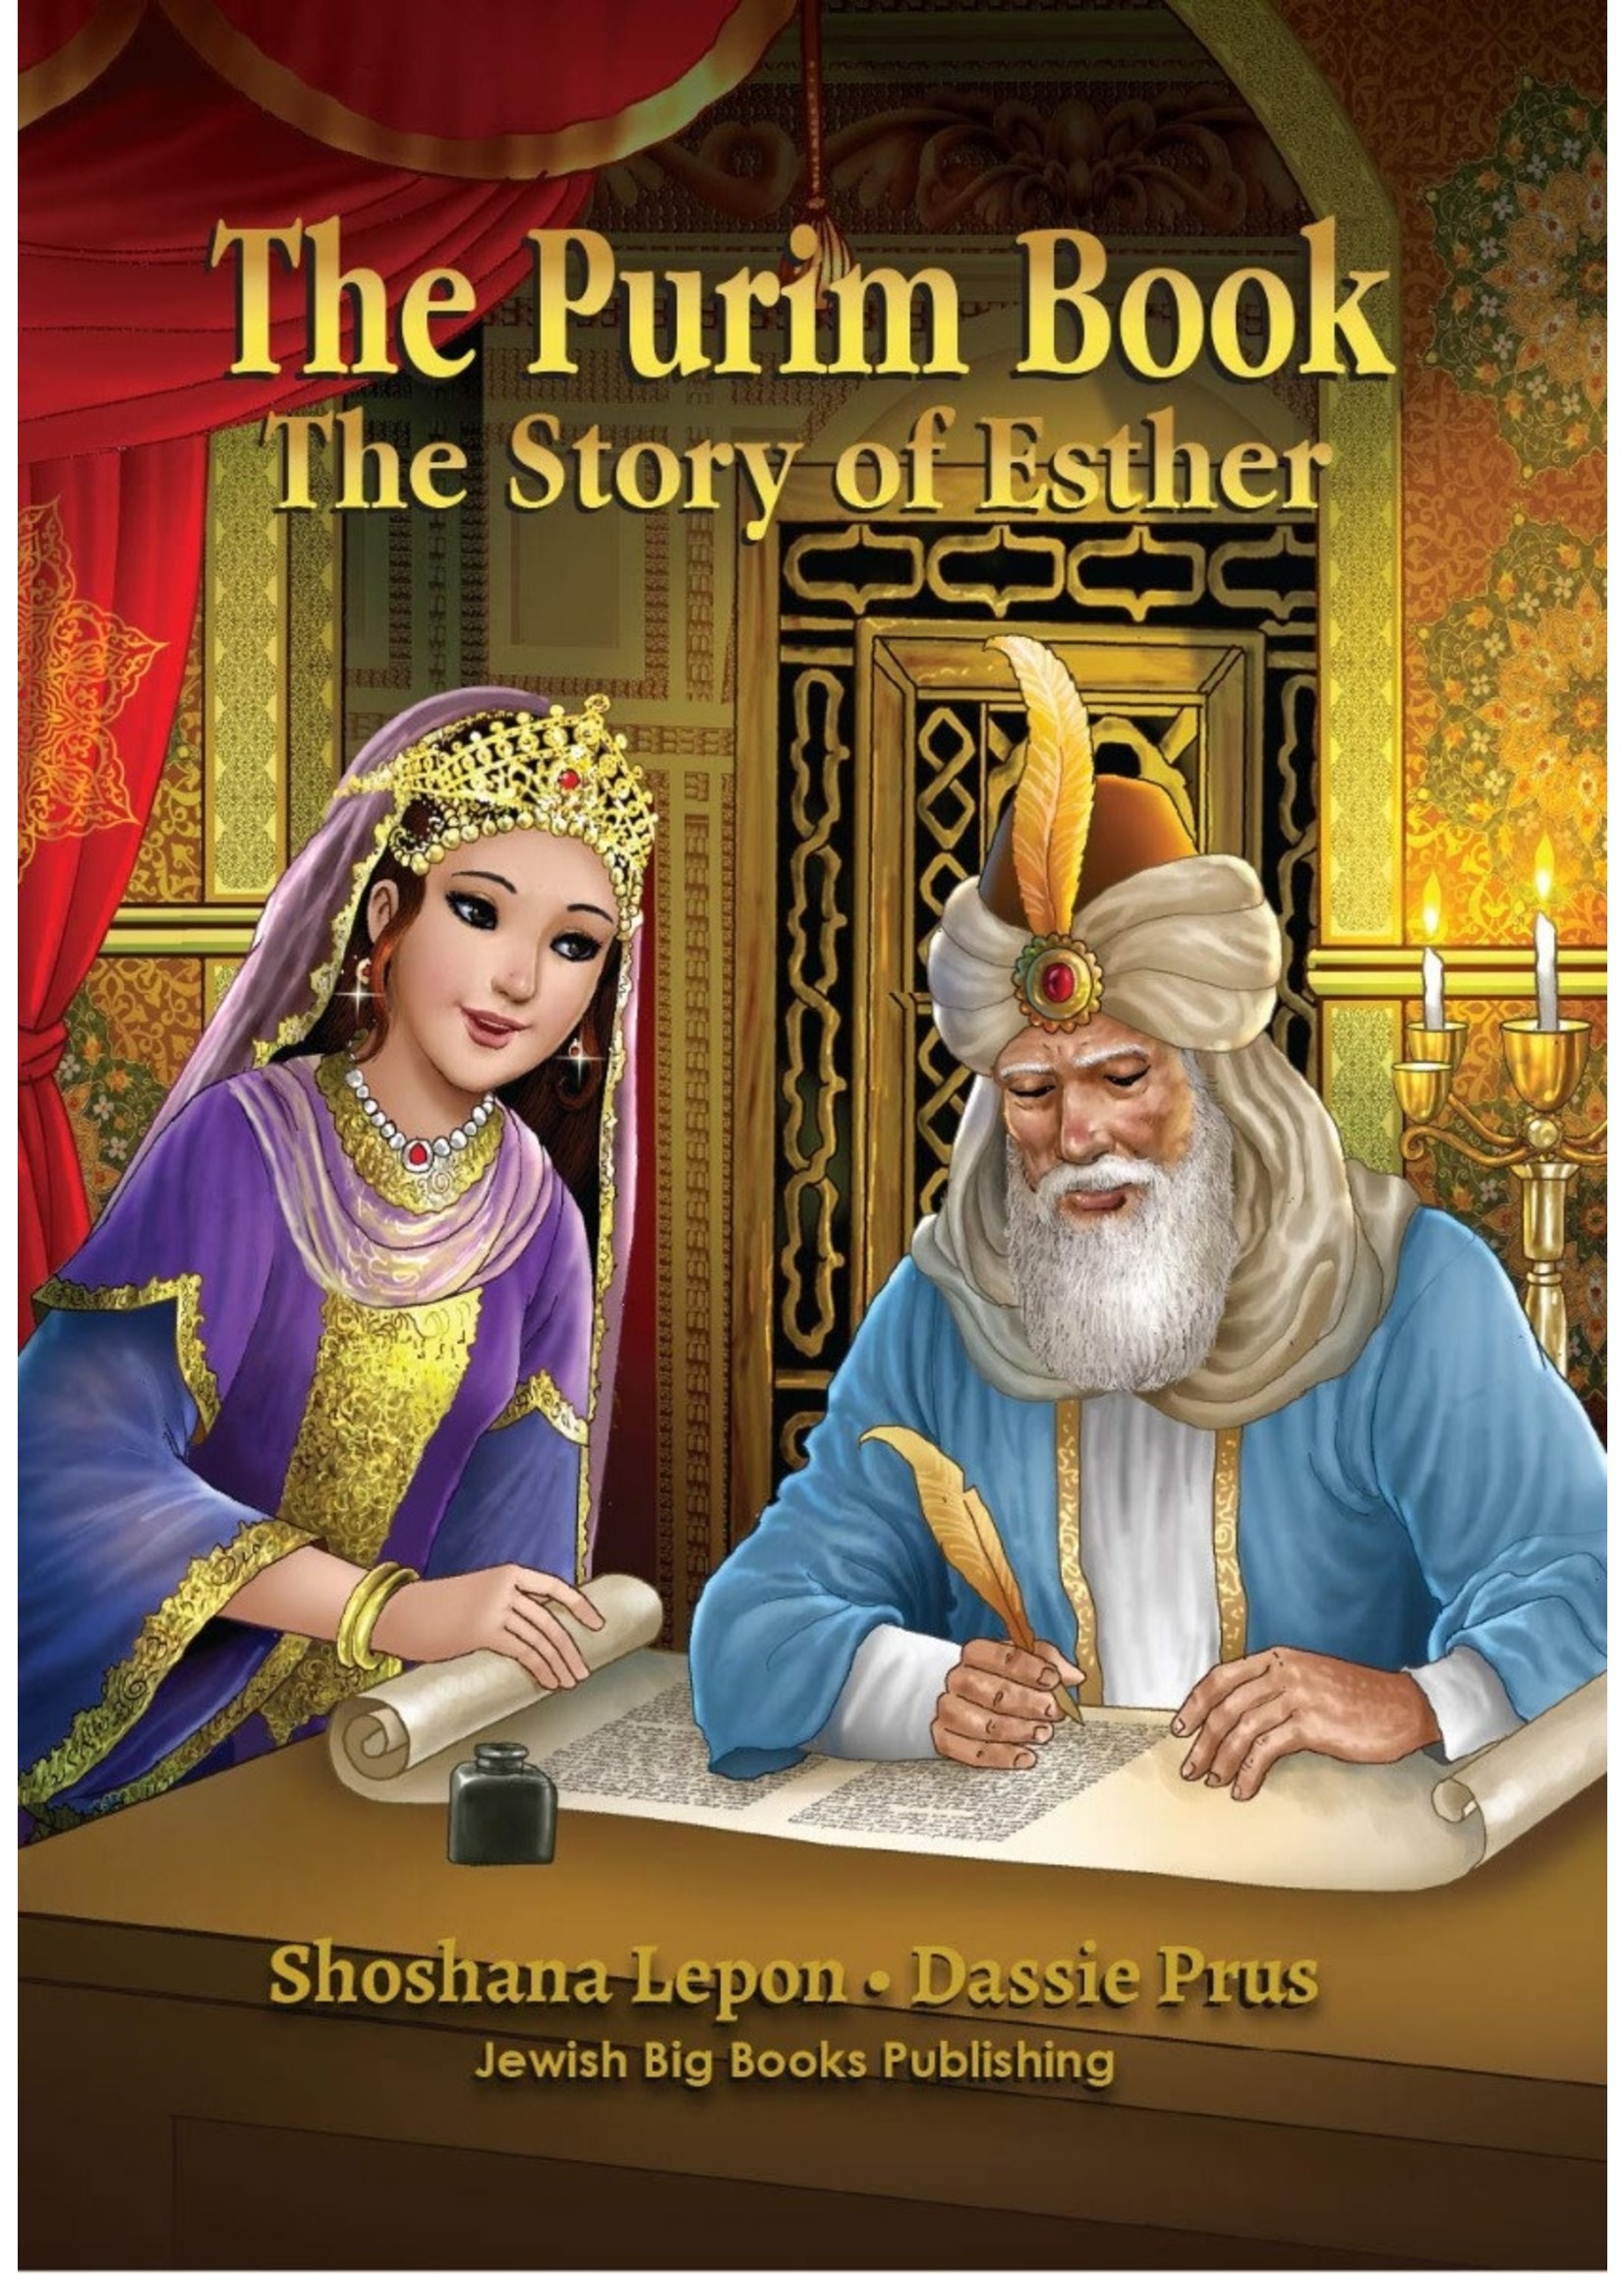 THE PURIM BOOK - STORY OF ESTHER